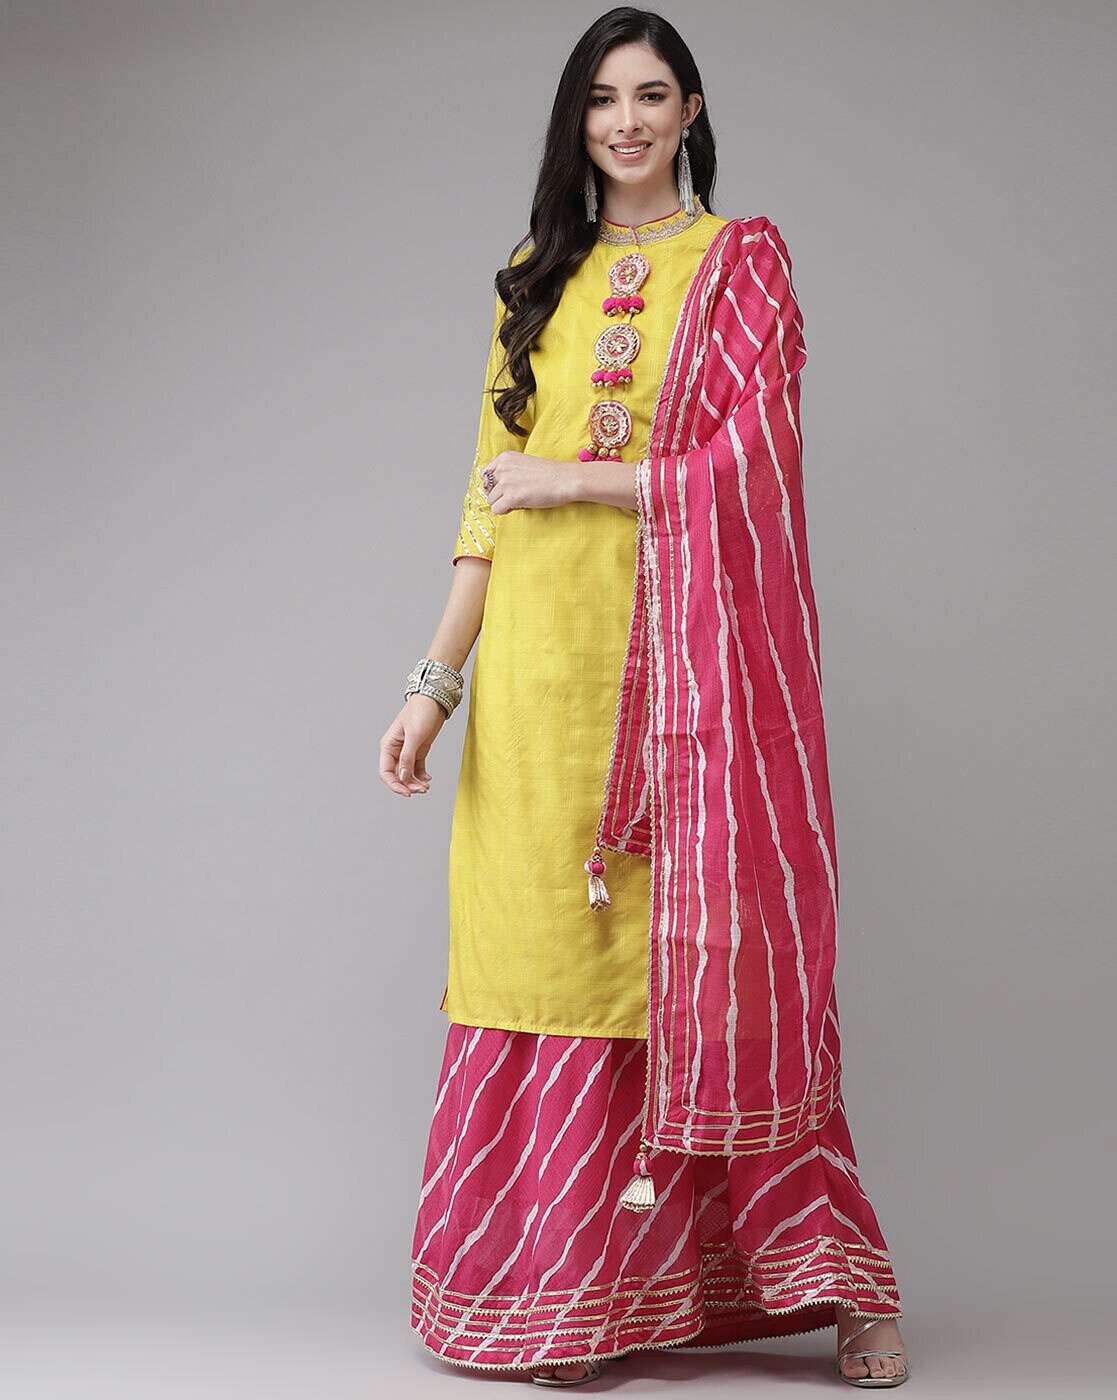 Details more than 146 pink and yellow kurti best